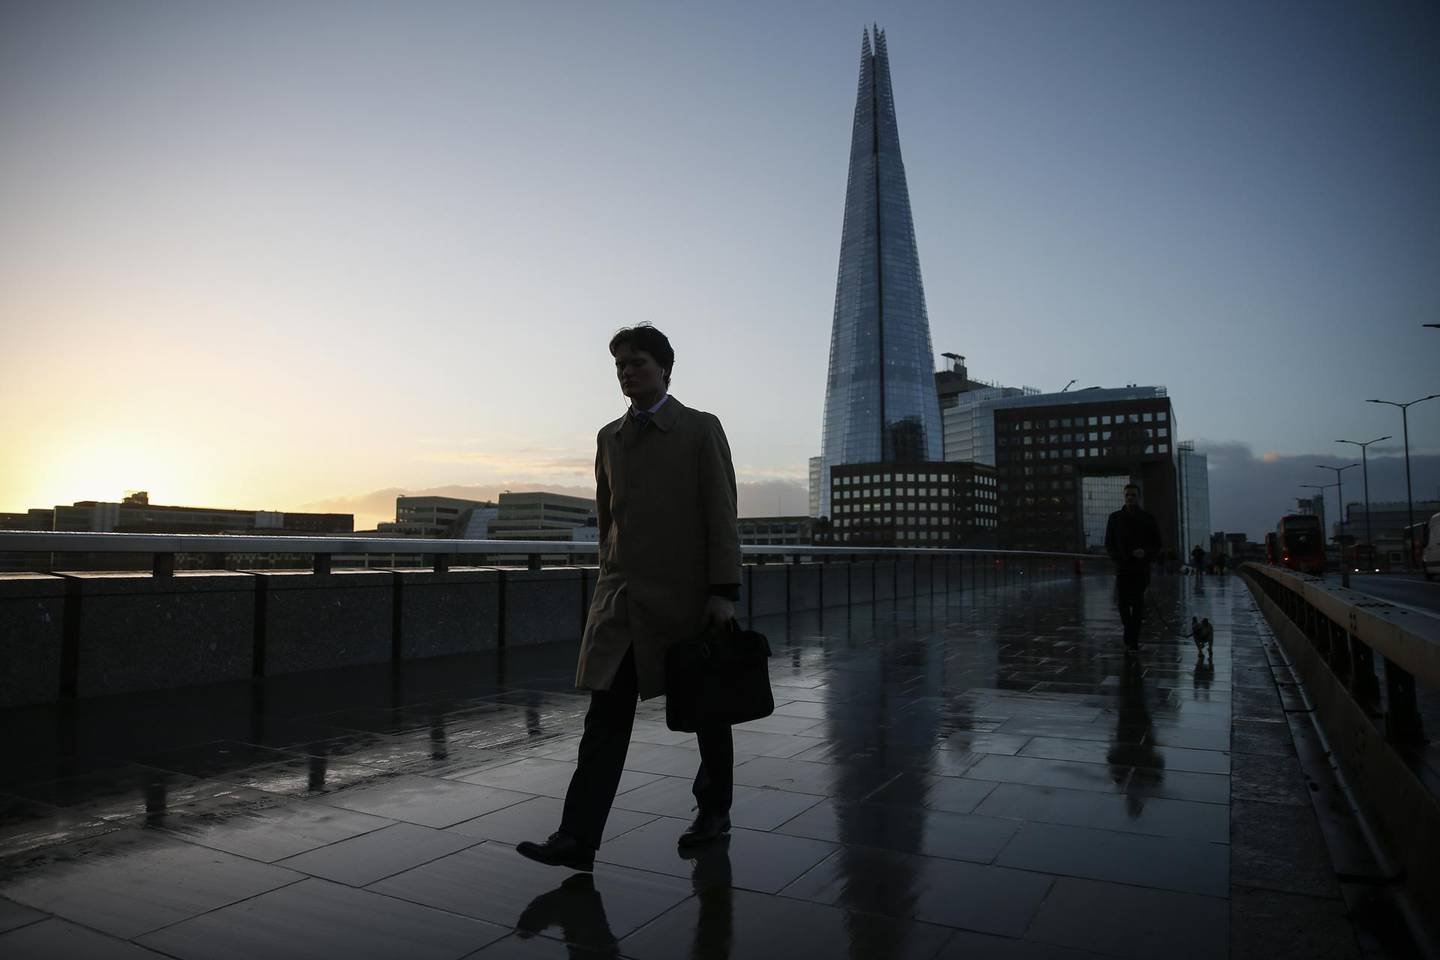 Commuters cross London Bridge in view of The Shard skyscraper in London, U.K., on Monday, Dec. 14, 2020. The topsy turvy trade talks between the U.K. and the European Union took another somersault on Sunday when Boris Johnson and Ursula von der Leyen gave negotiators another shot at closing a deal. Photographer: Hollie Adams/Bloomberg